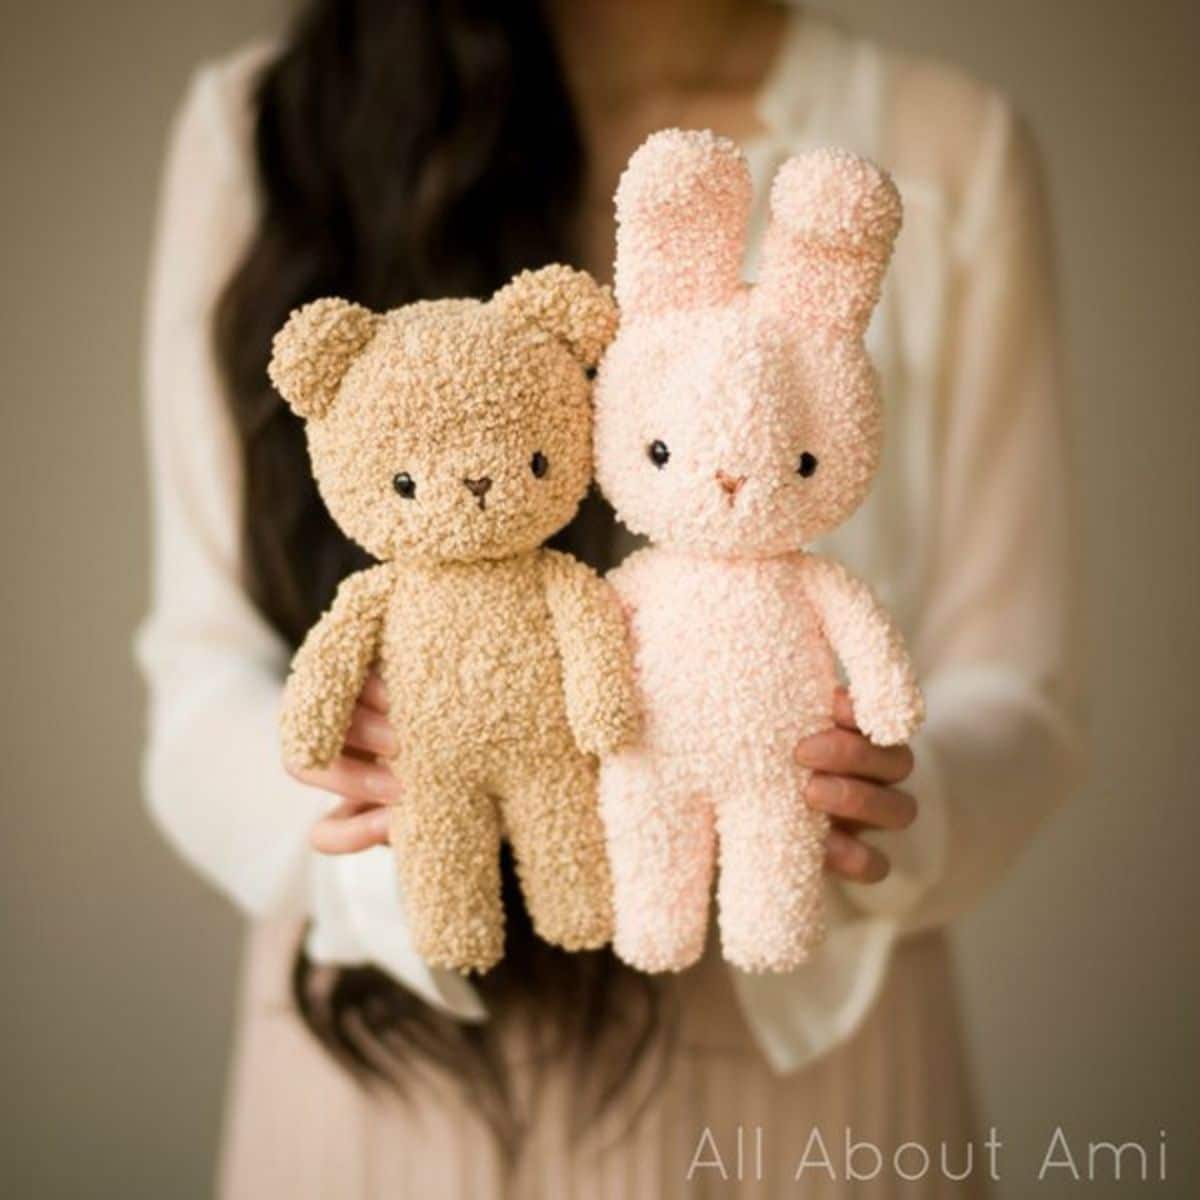 A dark haired woman holding a light brown crochet teddy bear and a pale pink crochet bunny on a white background.